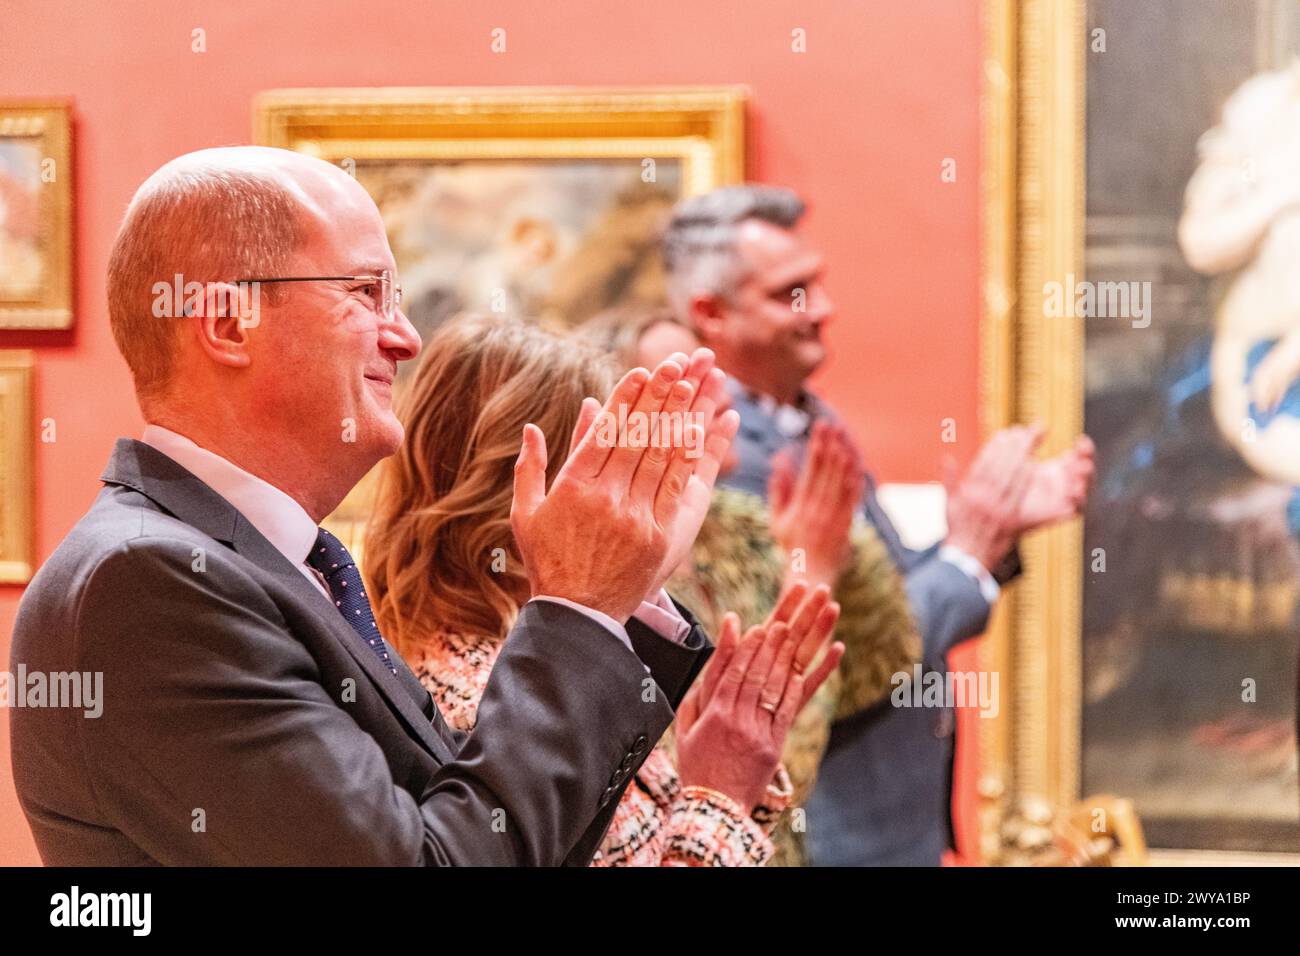 Wedding guests clapping and celebrating during a wedding ceremony at Dulwich Picture Gallery in London, UK Stock Photo